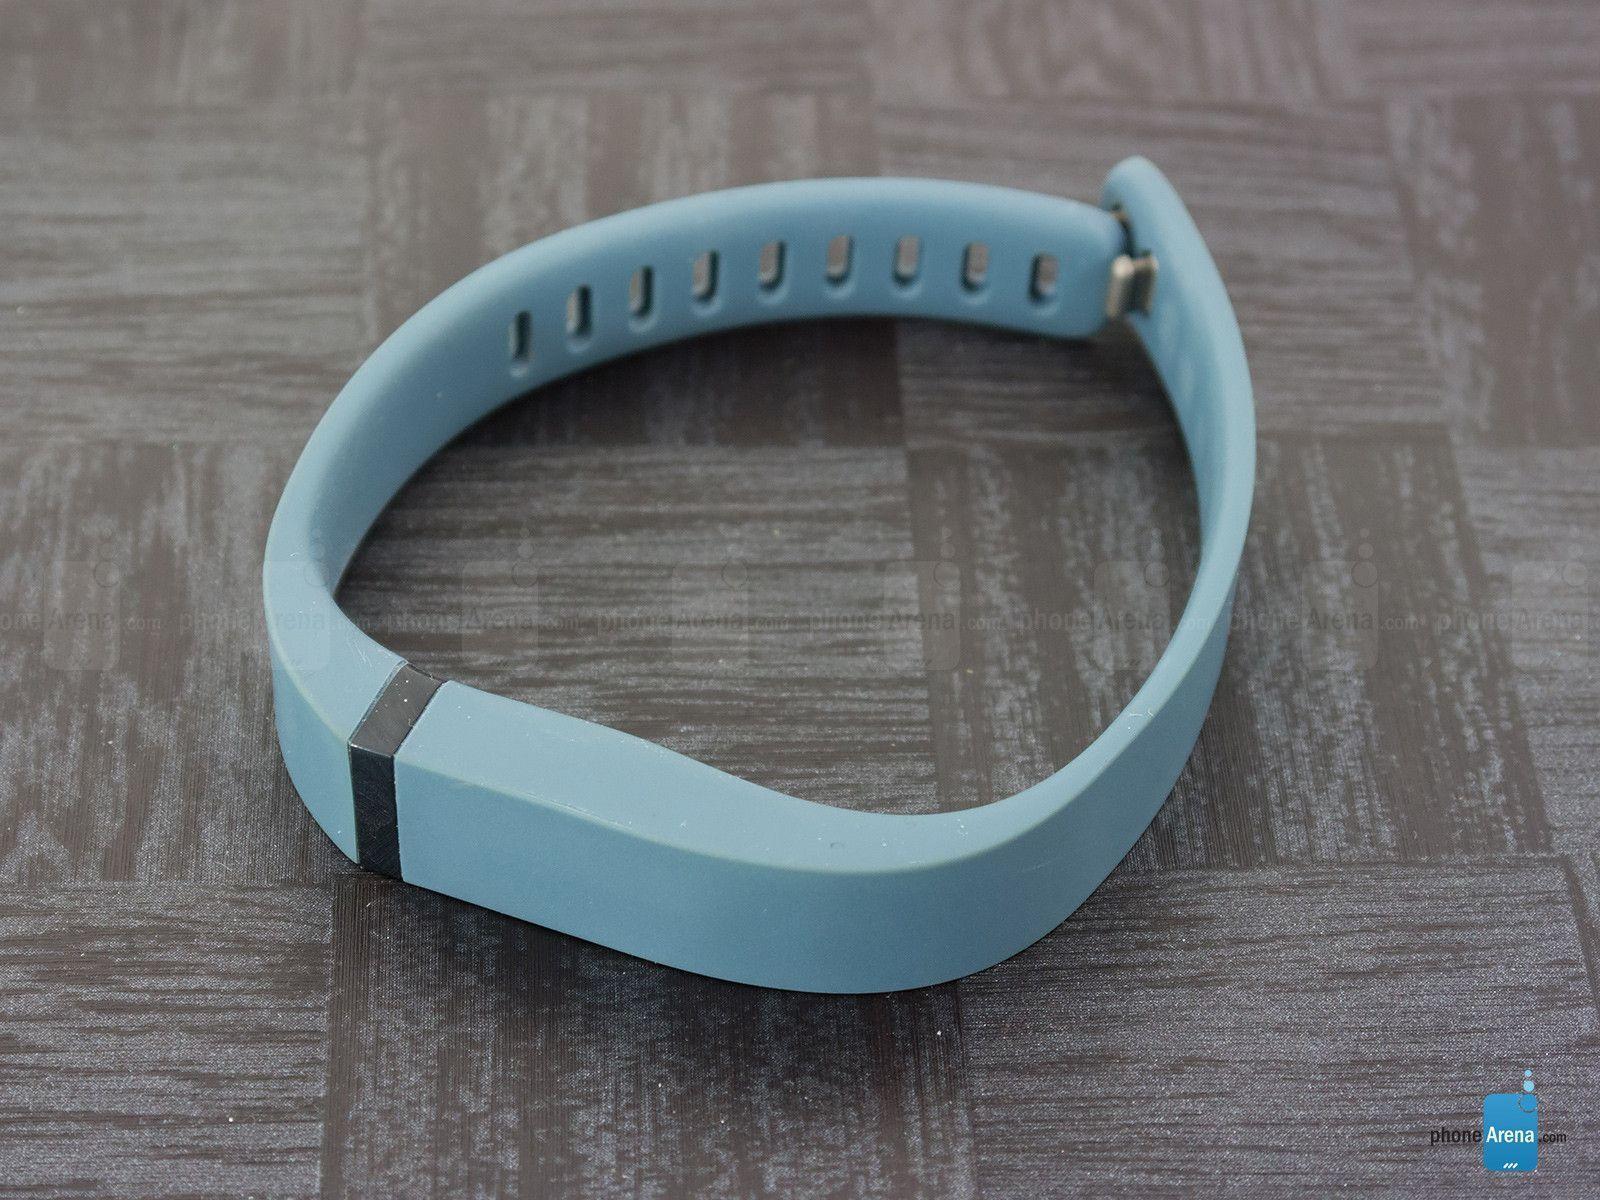 Fitbit Black Friday deals are out: save big on Fitbit Charge HR